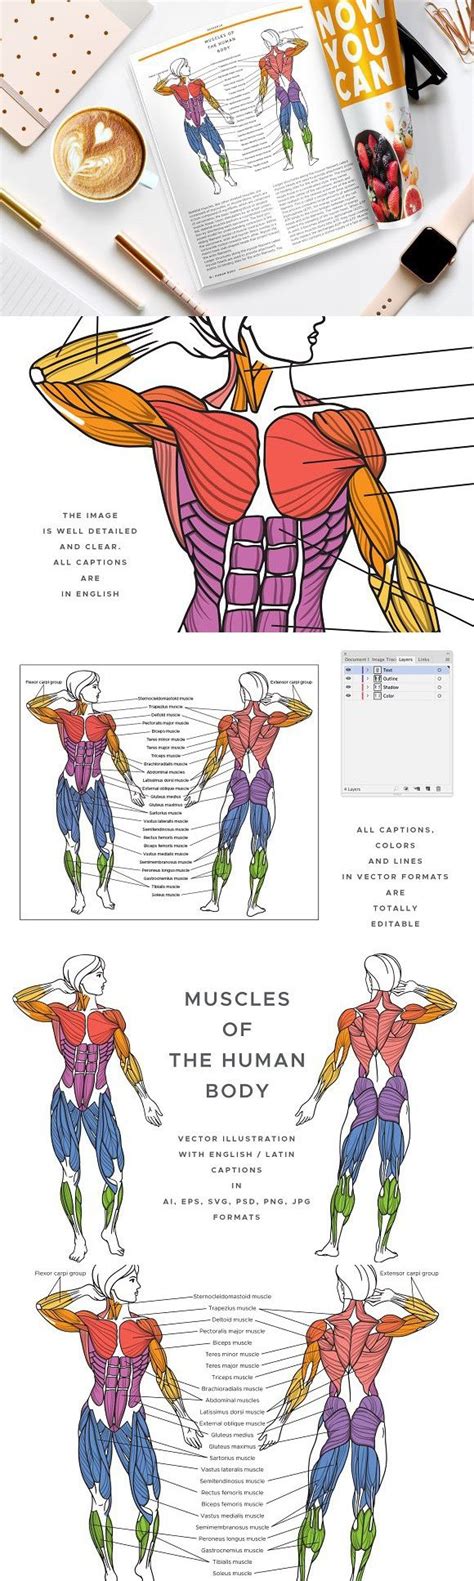 Muscle names are actually quite interesting. Muscles Of The Human Body | Human muscular system, Human body, Human